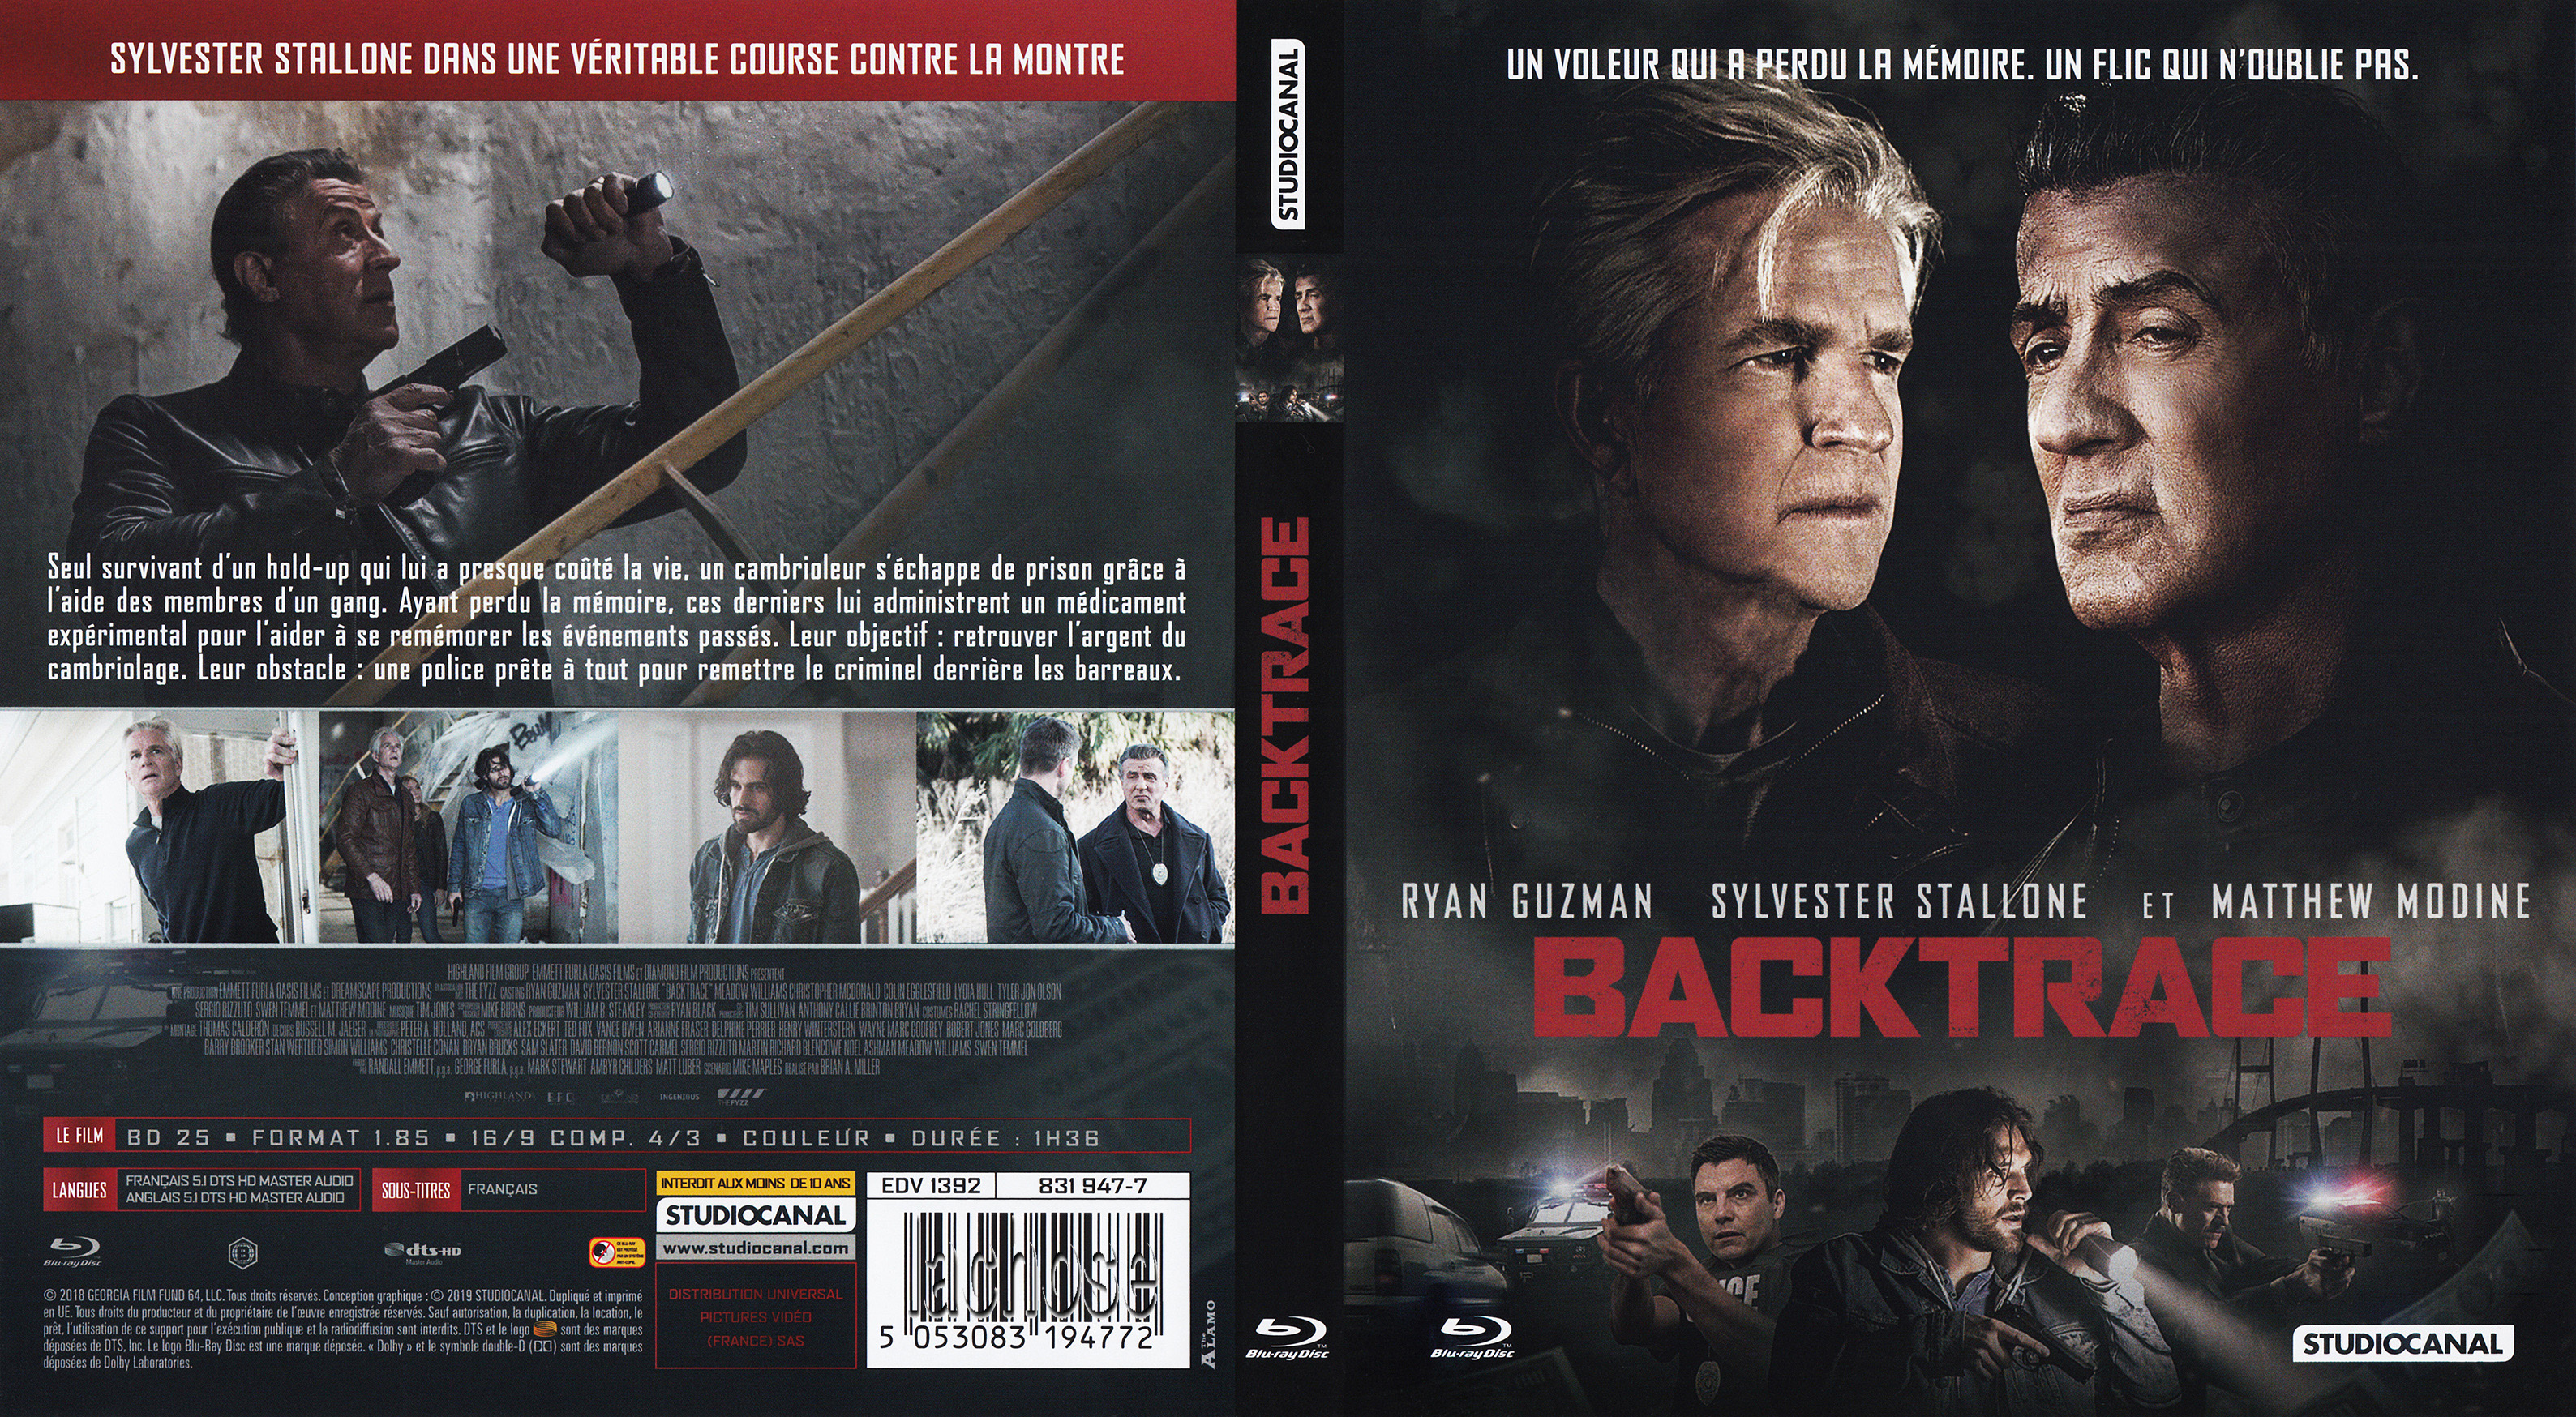 Jaquette DVD Backtrace (BLU-RAY)